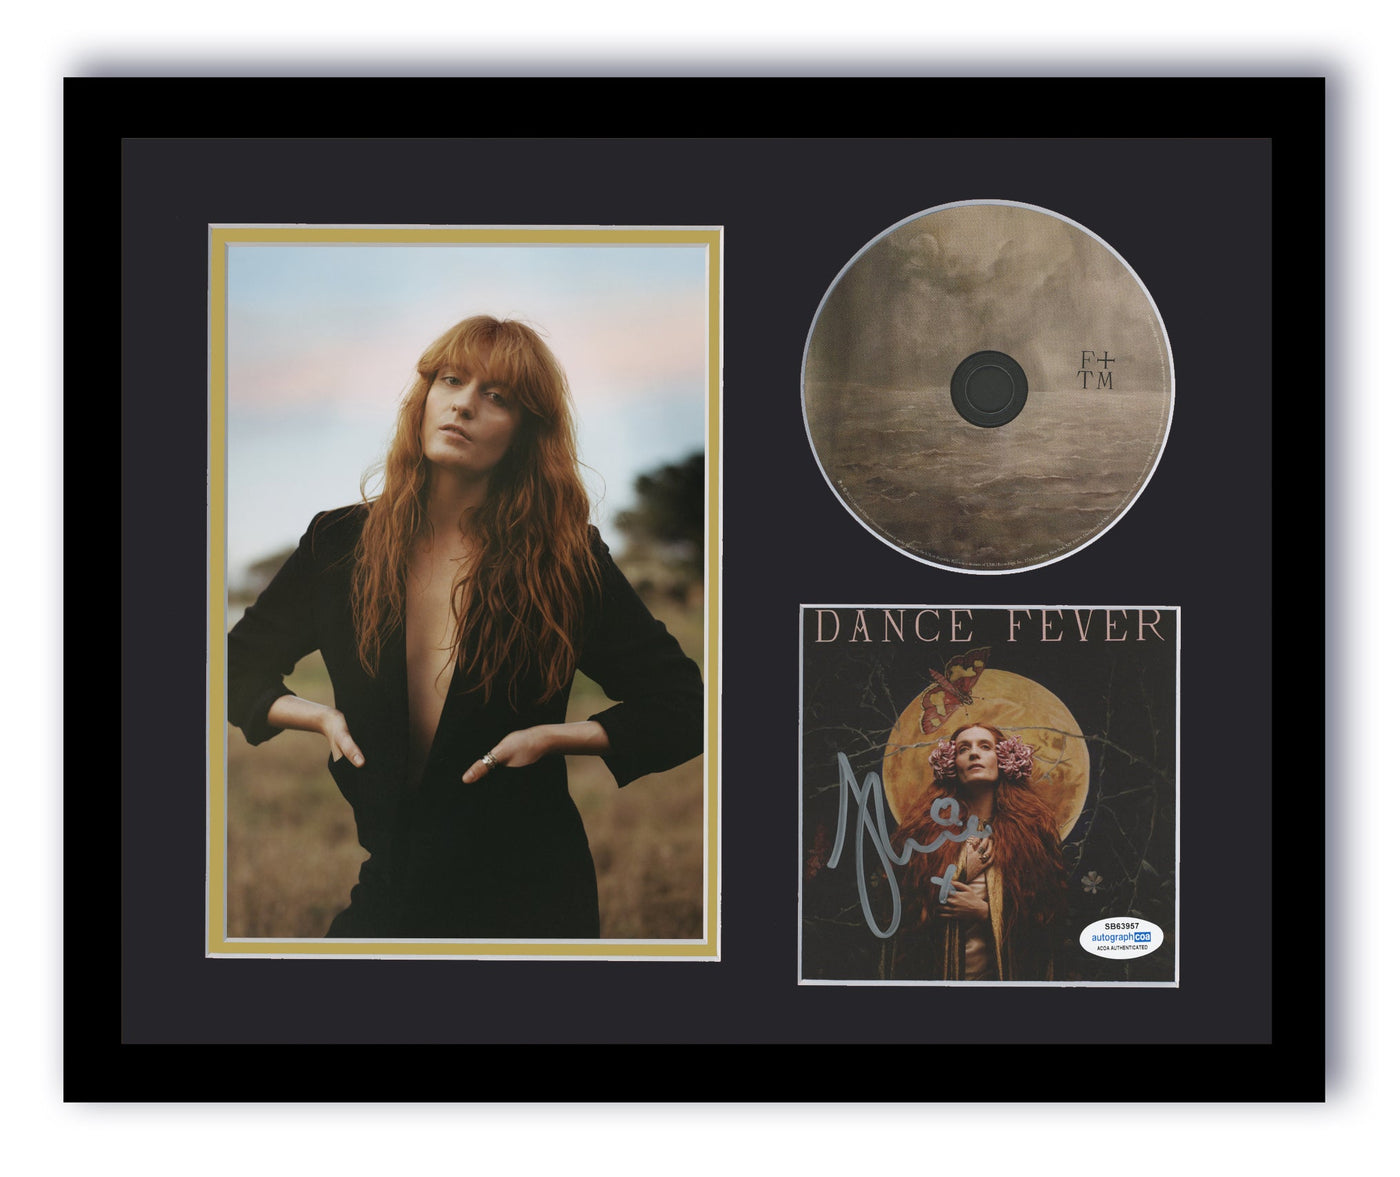 Florence Welch Autographed Signed 11x14 Framed CD Dance Fever ACOA